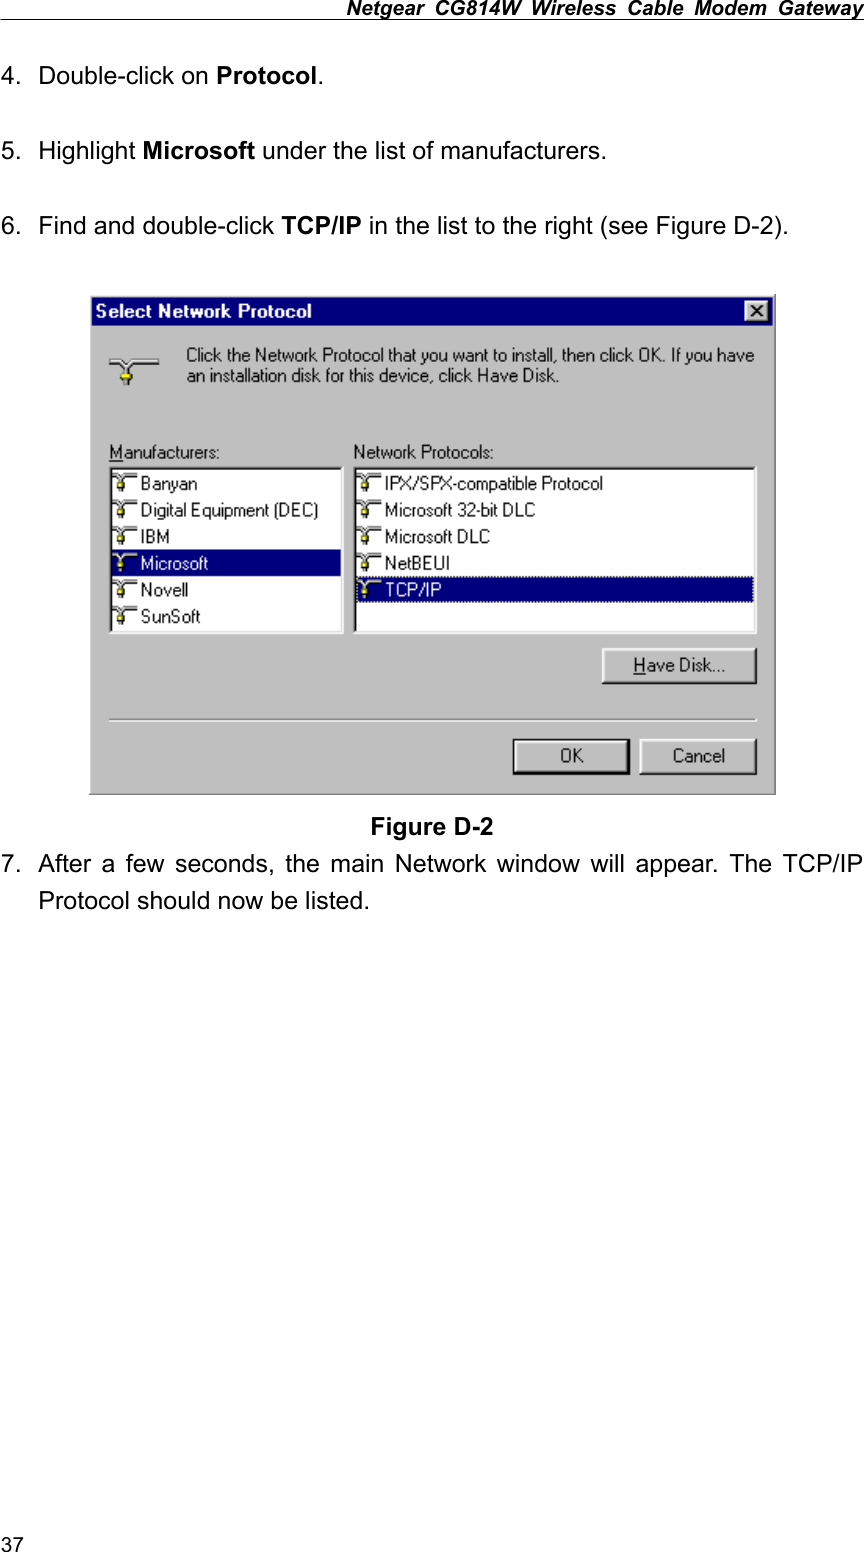 Netgear CG814W Wireless Cable Modem Gateway  4. Double-click on Protocol.  5. Highlight Microsoft under the list of manufacturers.  6.  Find and double-click TCP/IP in the list to the right (see Figure D-2).   Figure D-2 7.  After a few seconds, the main Network window will appear. The TCP/IP Protocol should now be listed. 37 